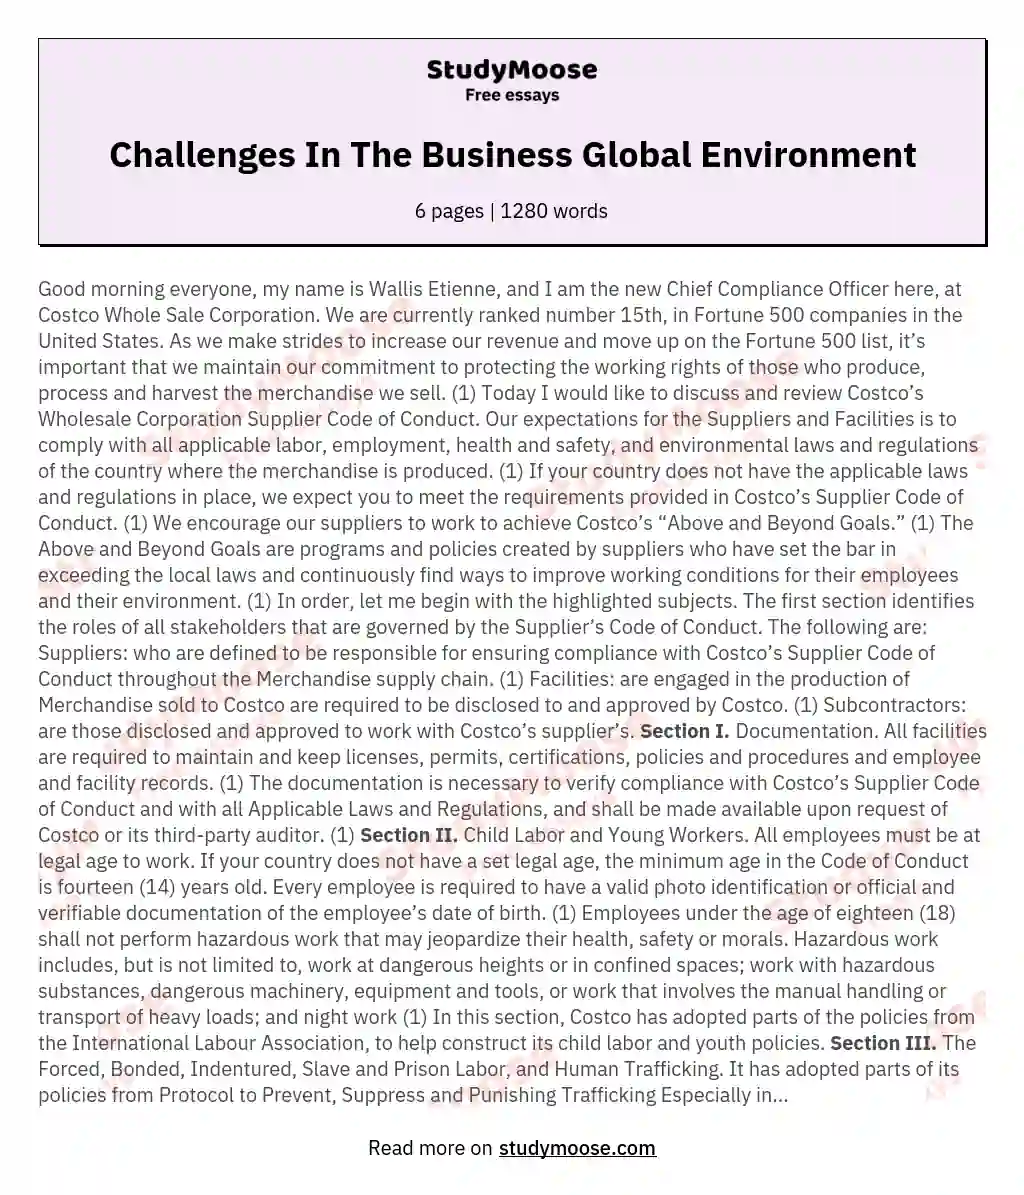 Challenges In The Business Global Environment essay